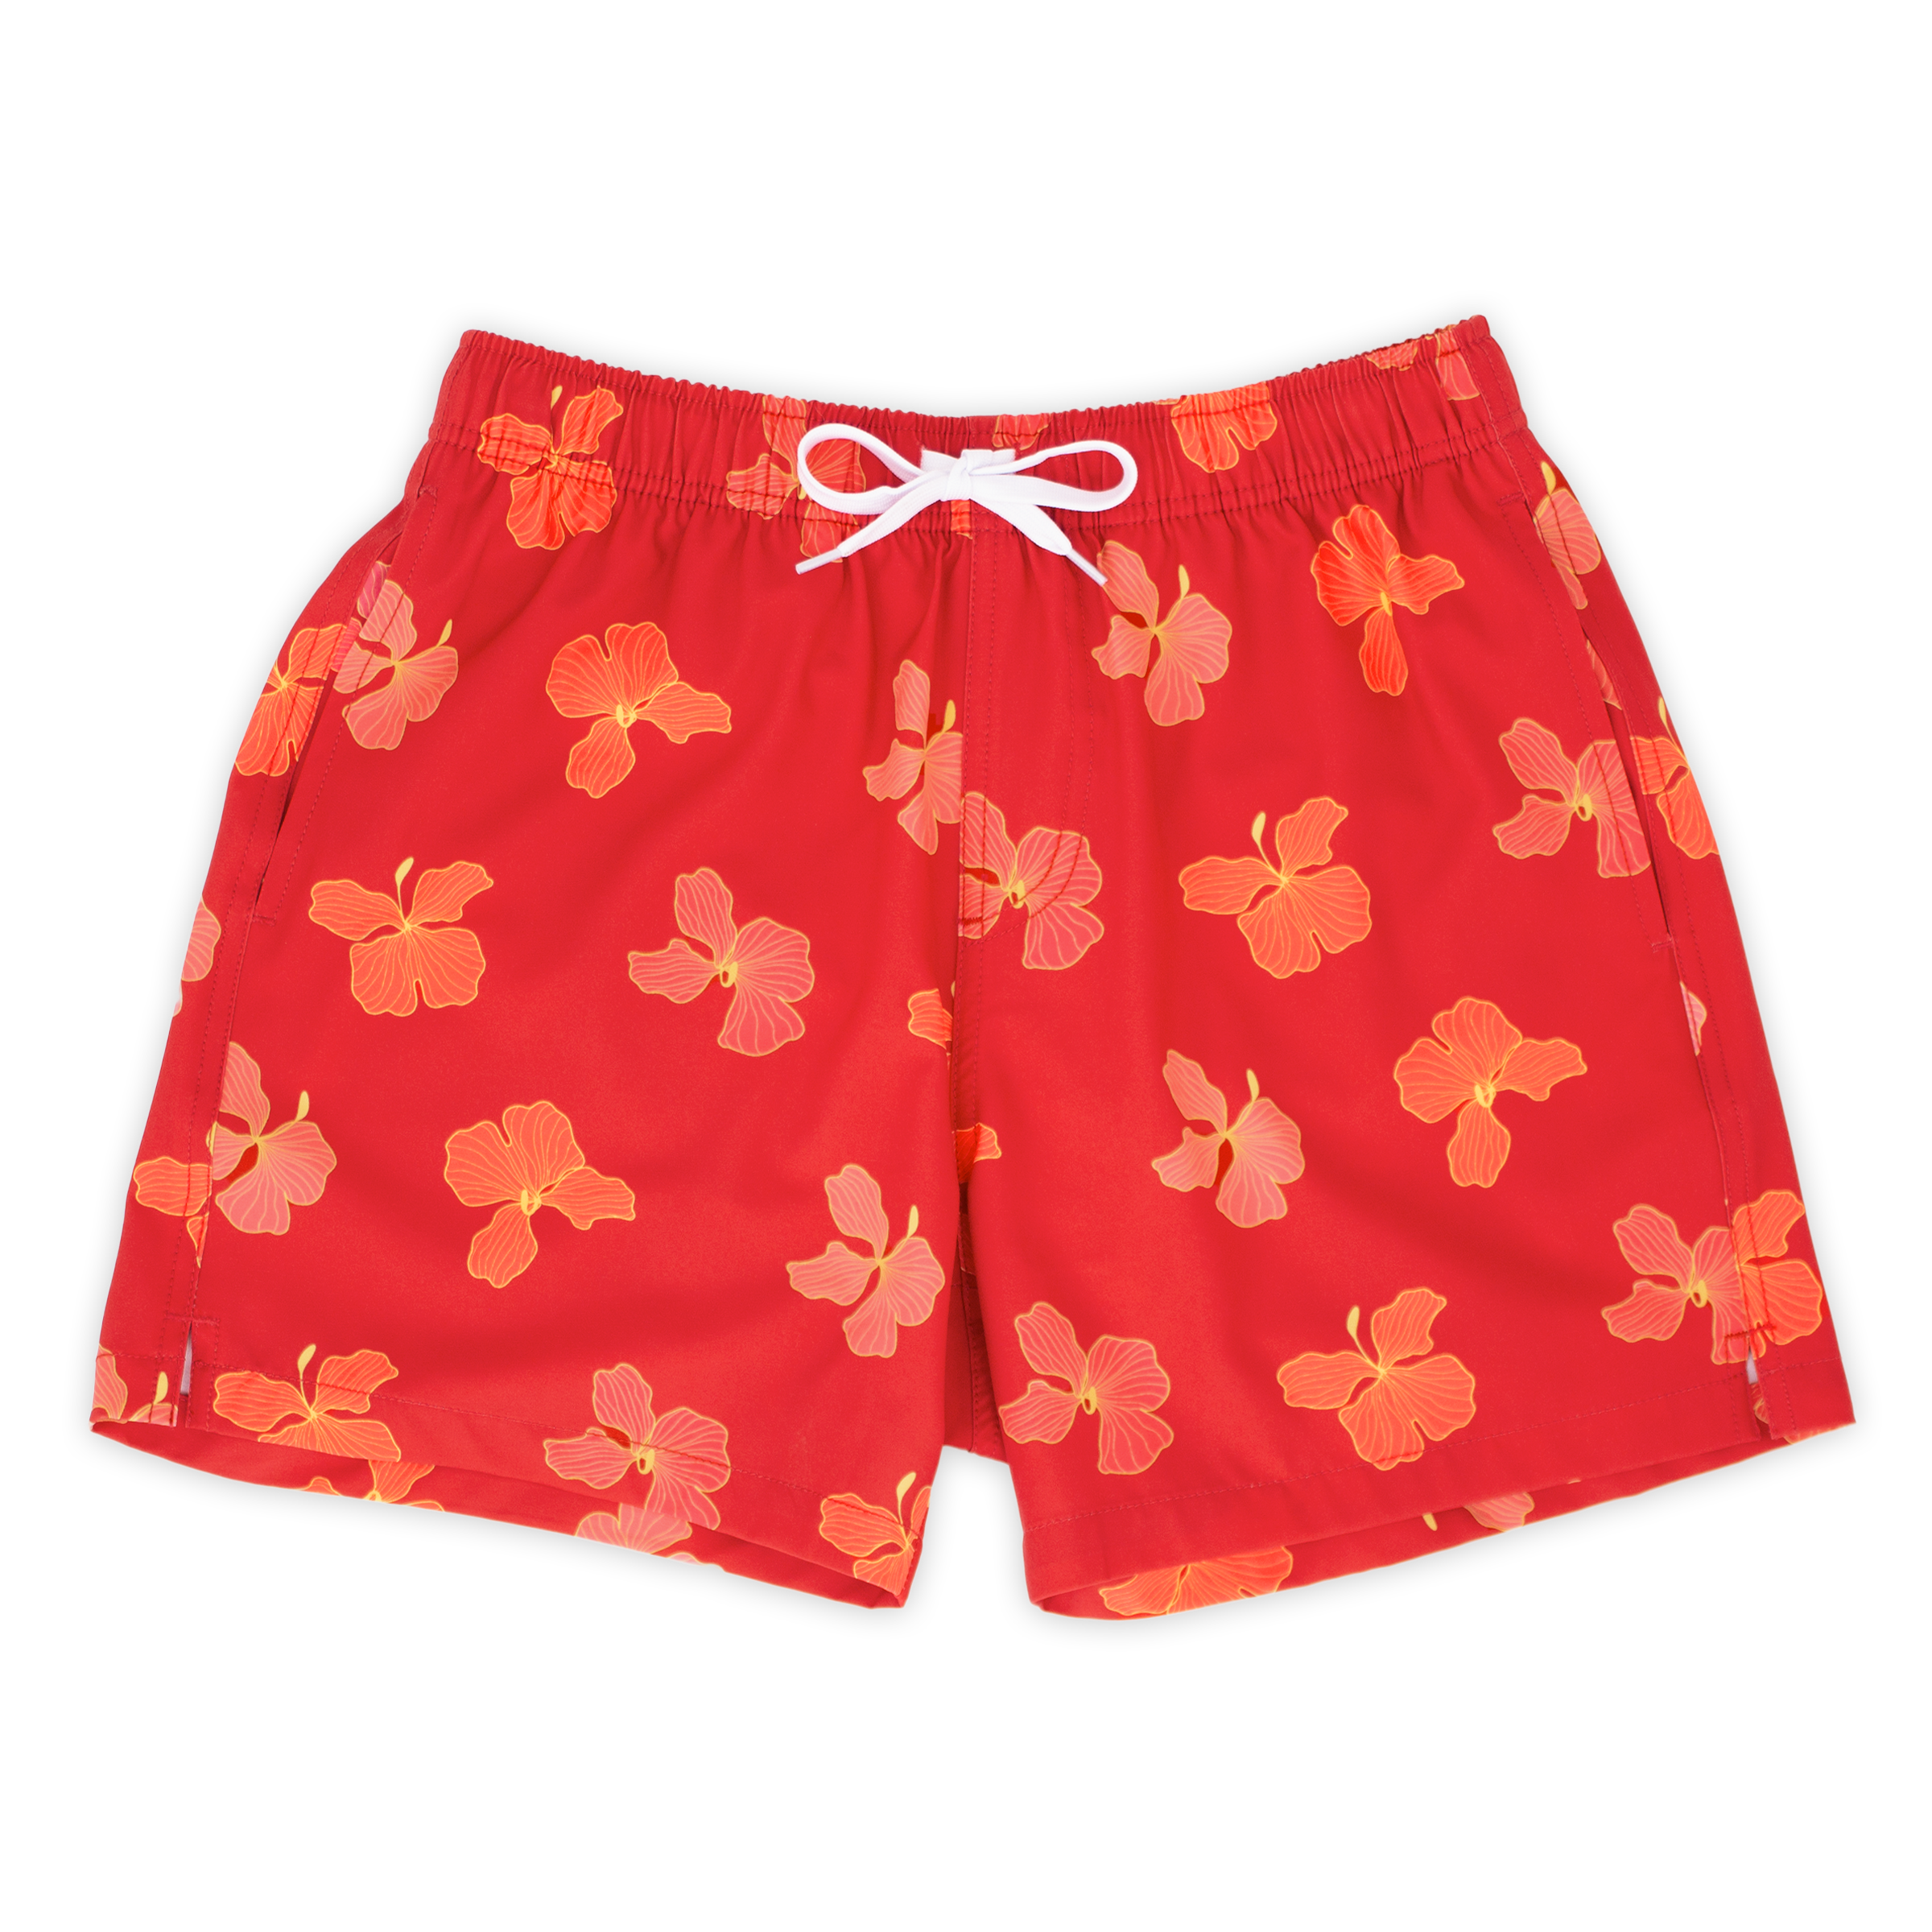 Stretch Swim 5.5" Hibiscus front, a bright red printed with pink and orange sketched hibiscus flowers with an elastic waistband, two inseam pockets, and a white drawstring